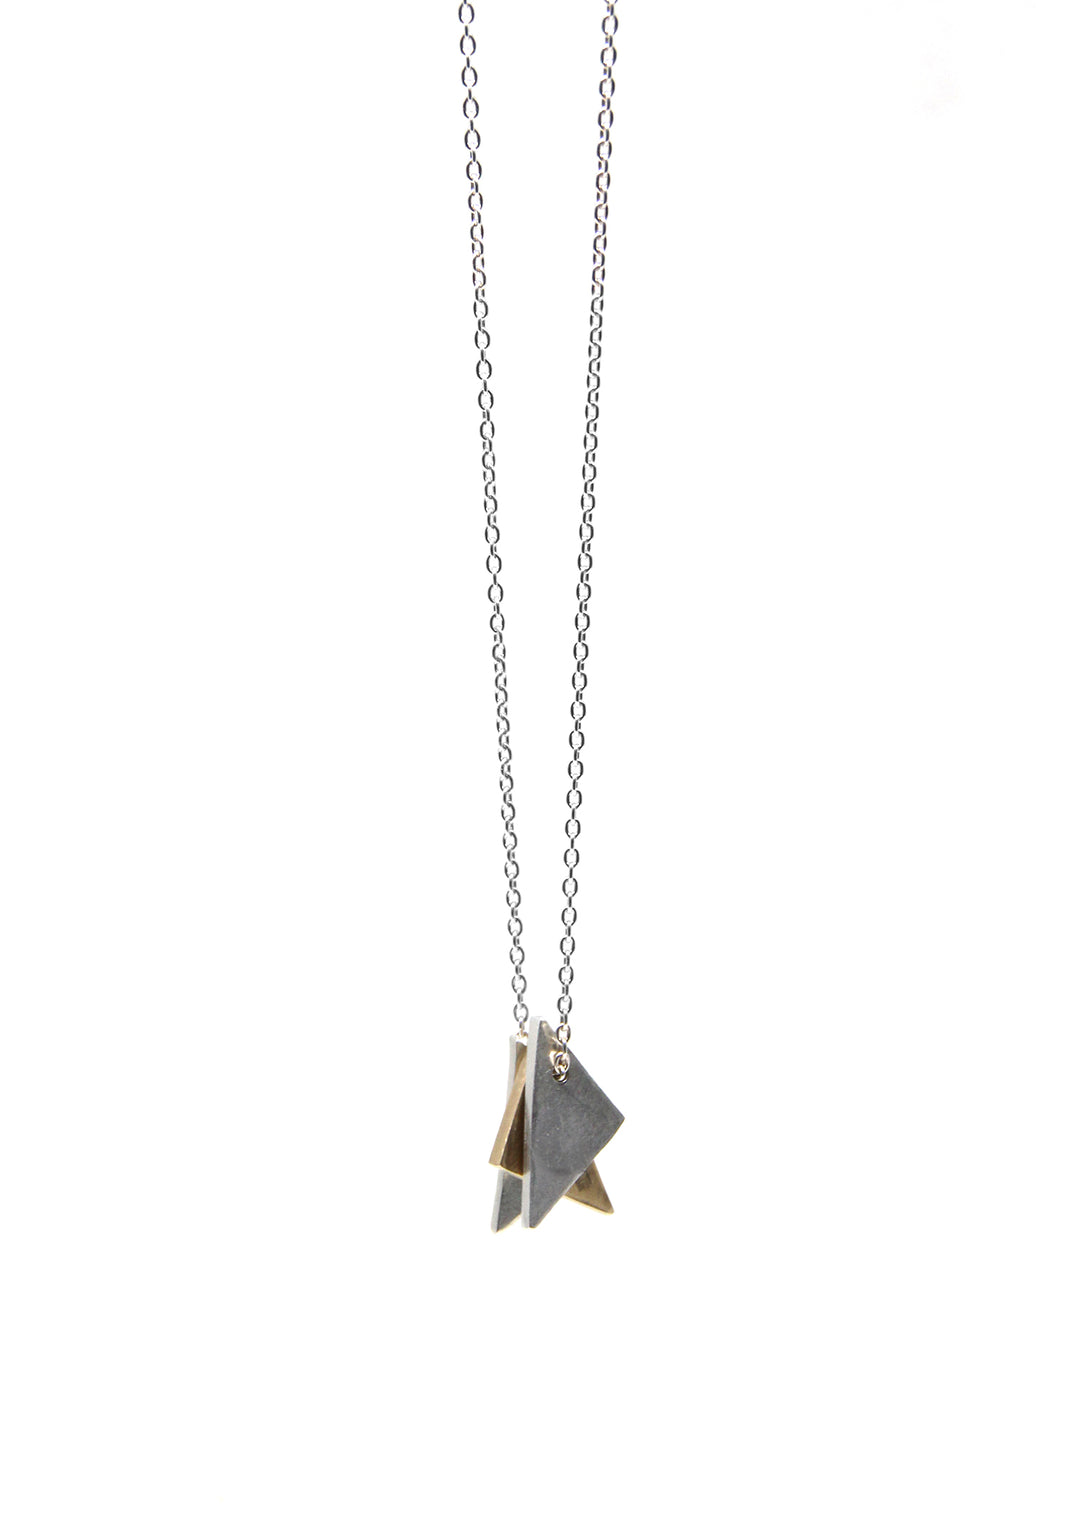 llayers jewelry necklace collier personnalisé triangles unity 002